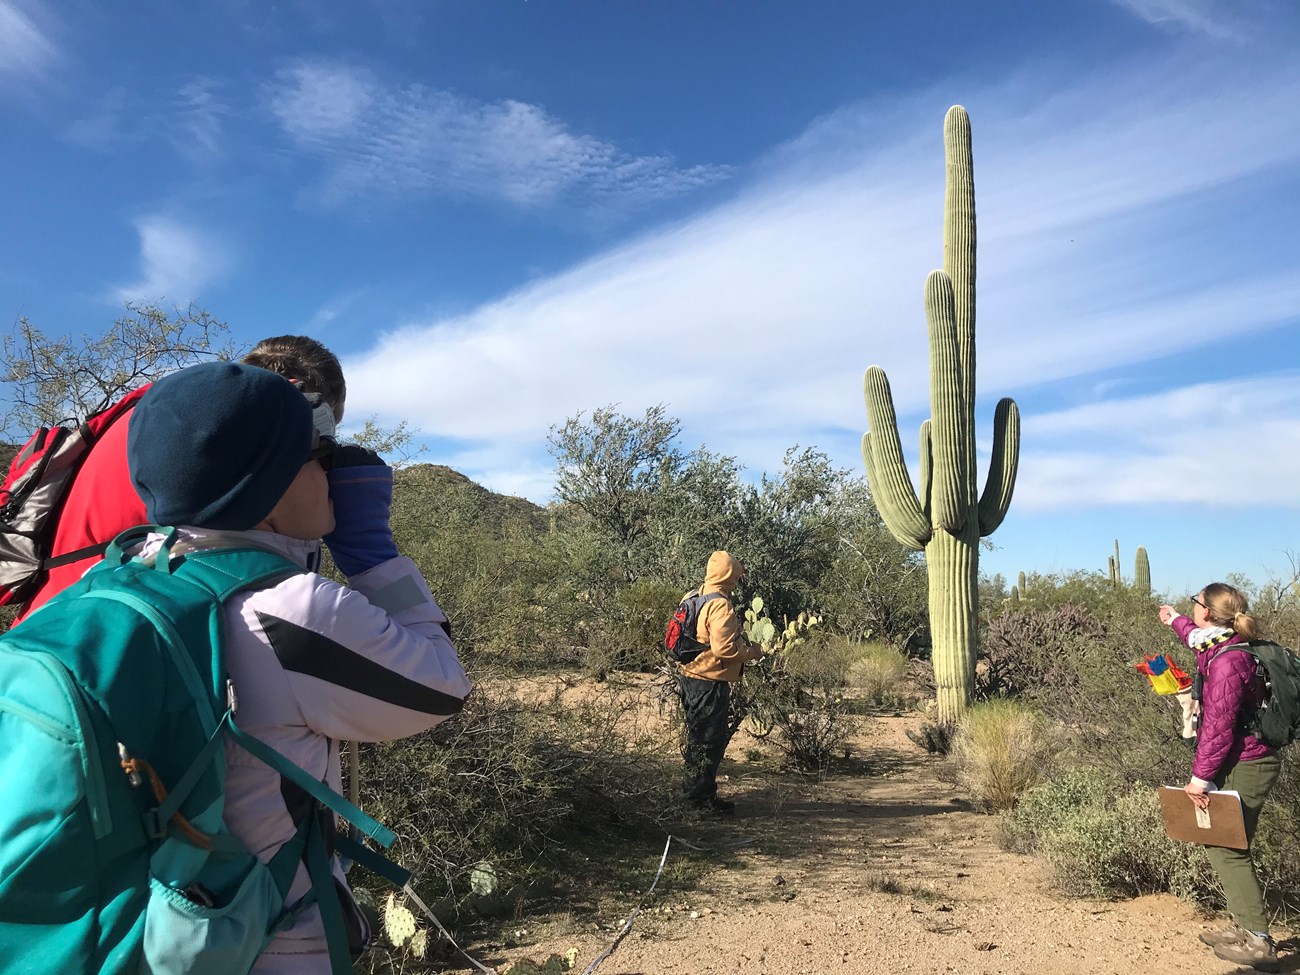 Park staff and volunteers collect data on large saguaro